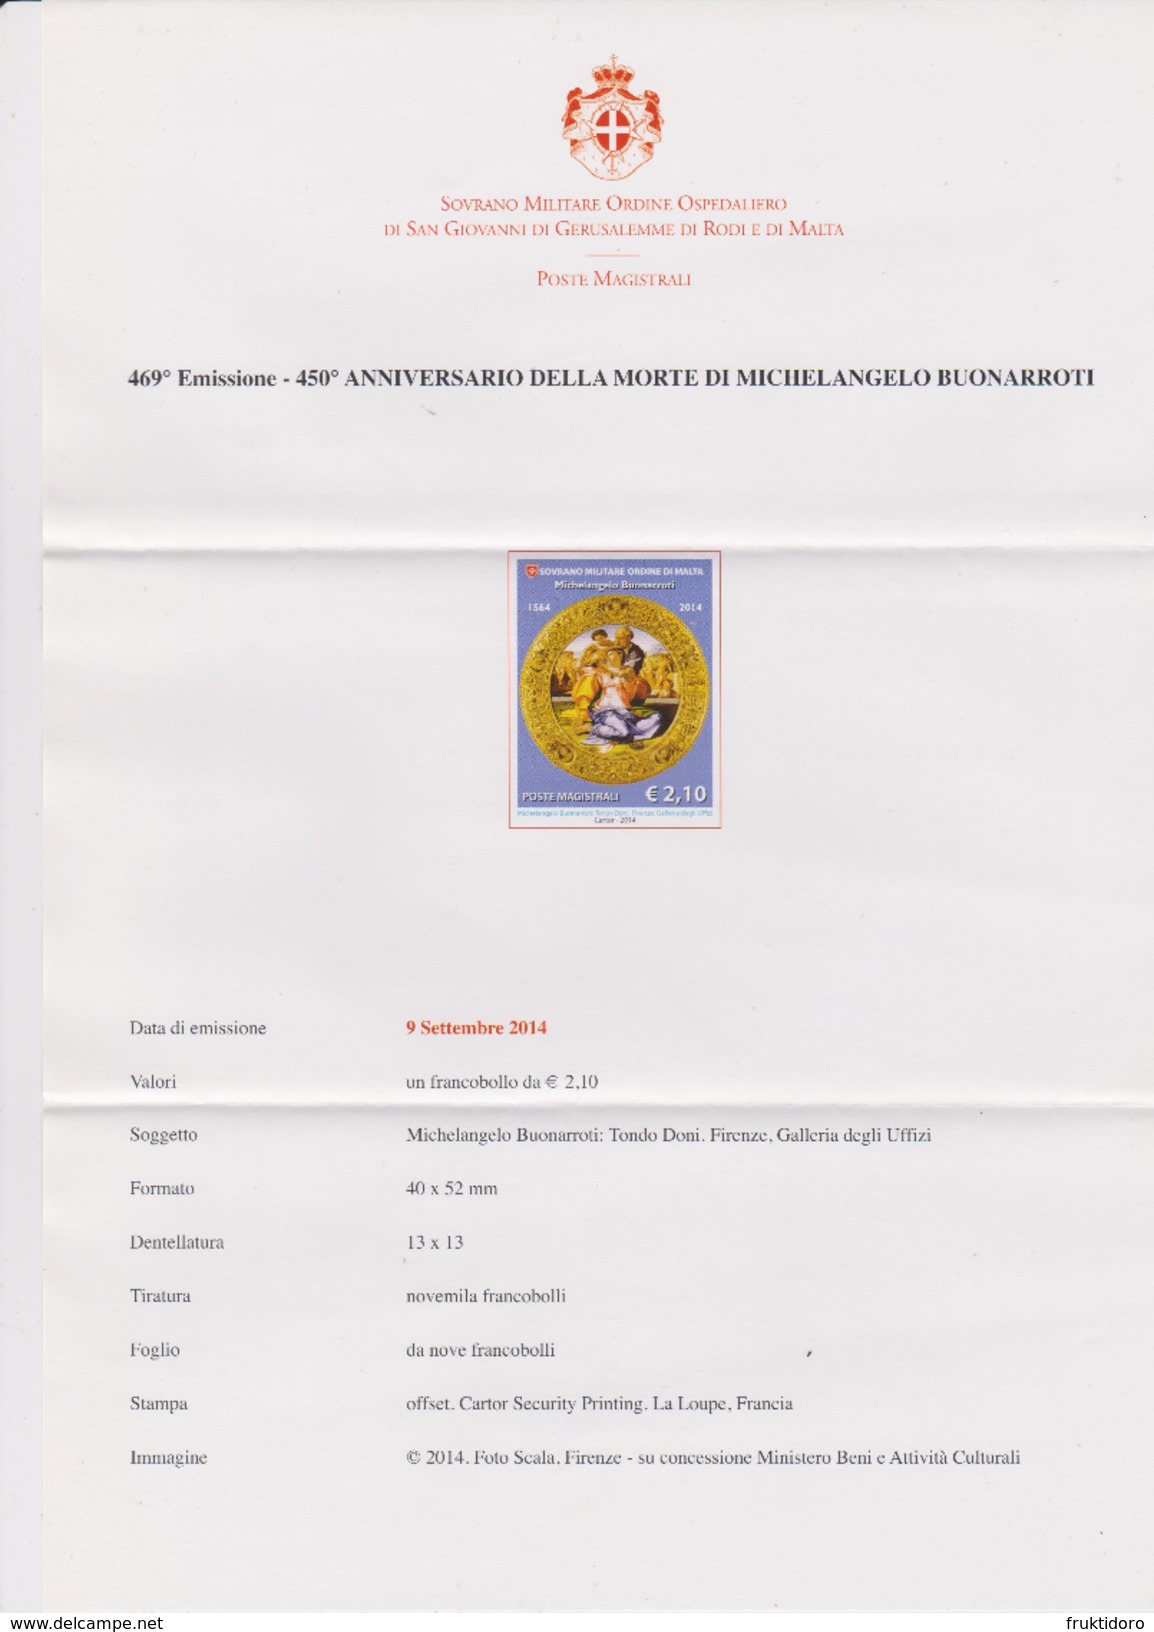 SMOM Sovereign Order Of Malta 2014 Brochure About Paintings - Tondo Doni - Holy Family - Malte (Ordre De)